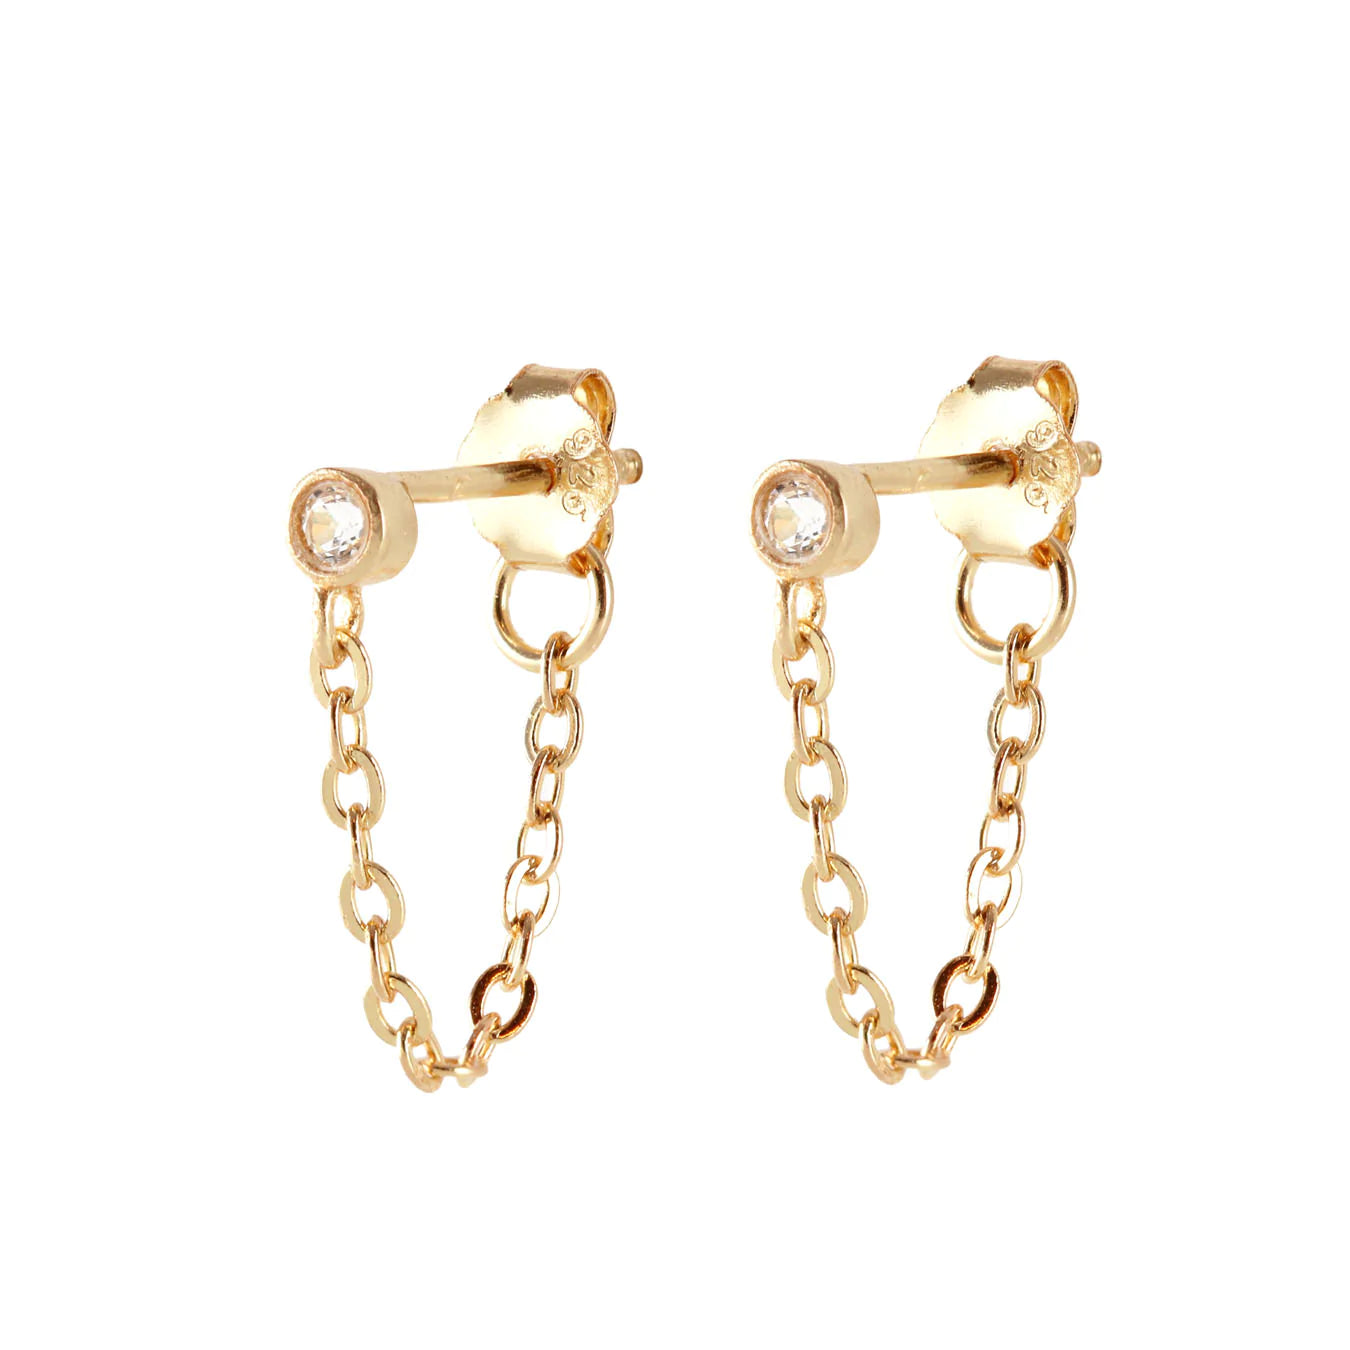 Kris Nations Chain Stud Earrings with White Topaz